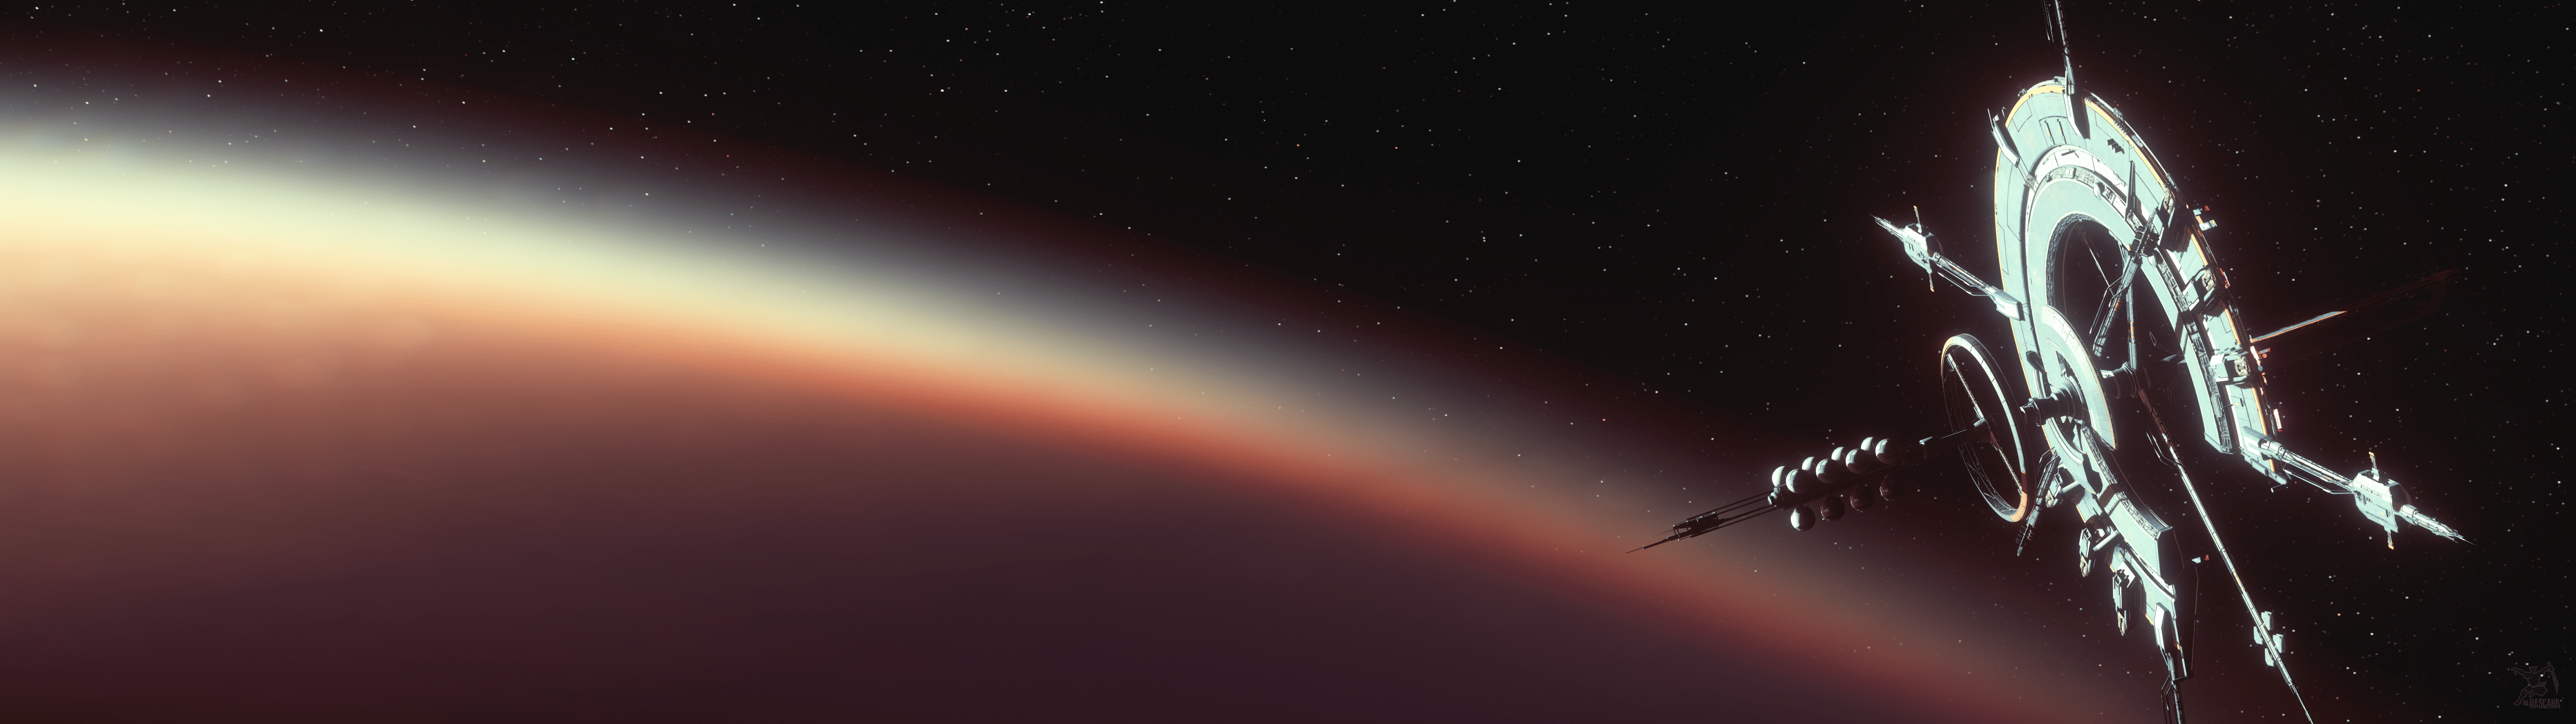 A space station orbits a red planet in this 3D illustration. - 5120x1440